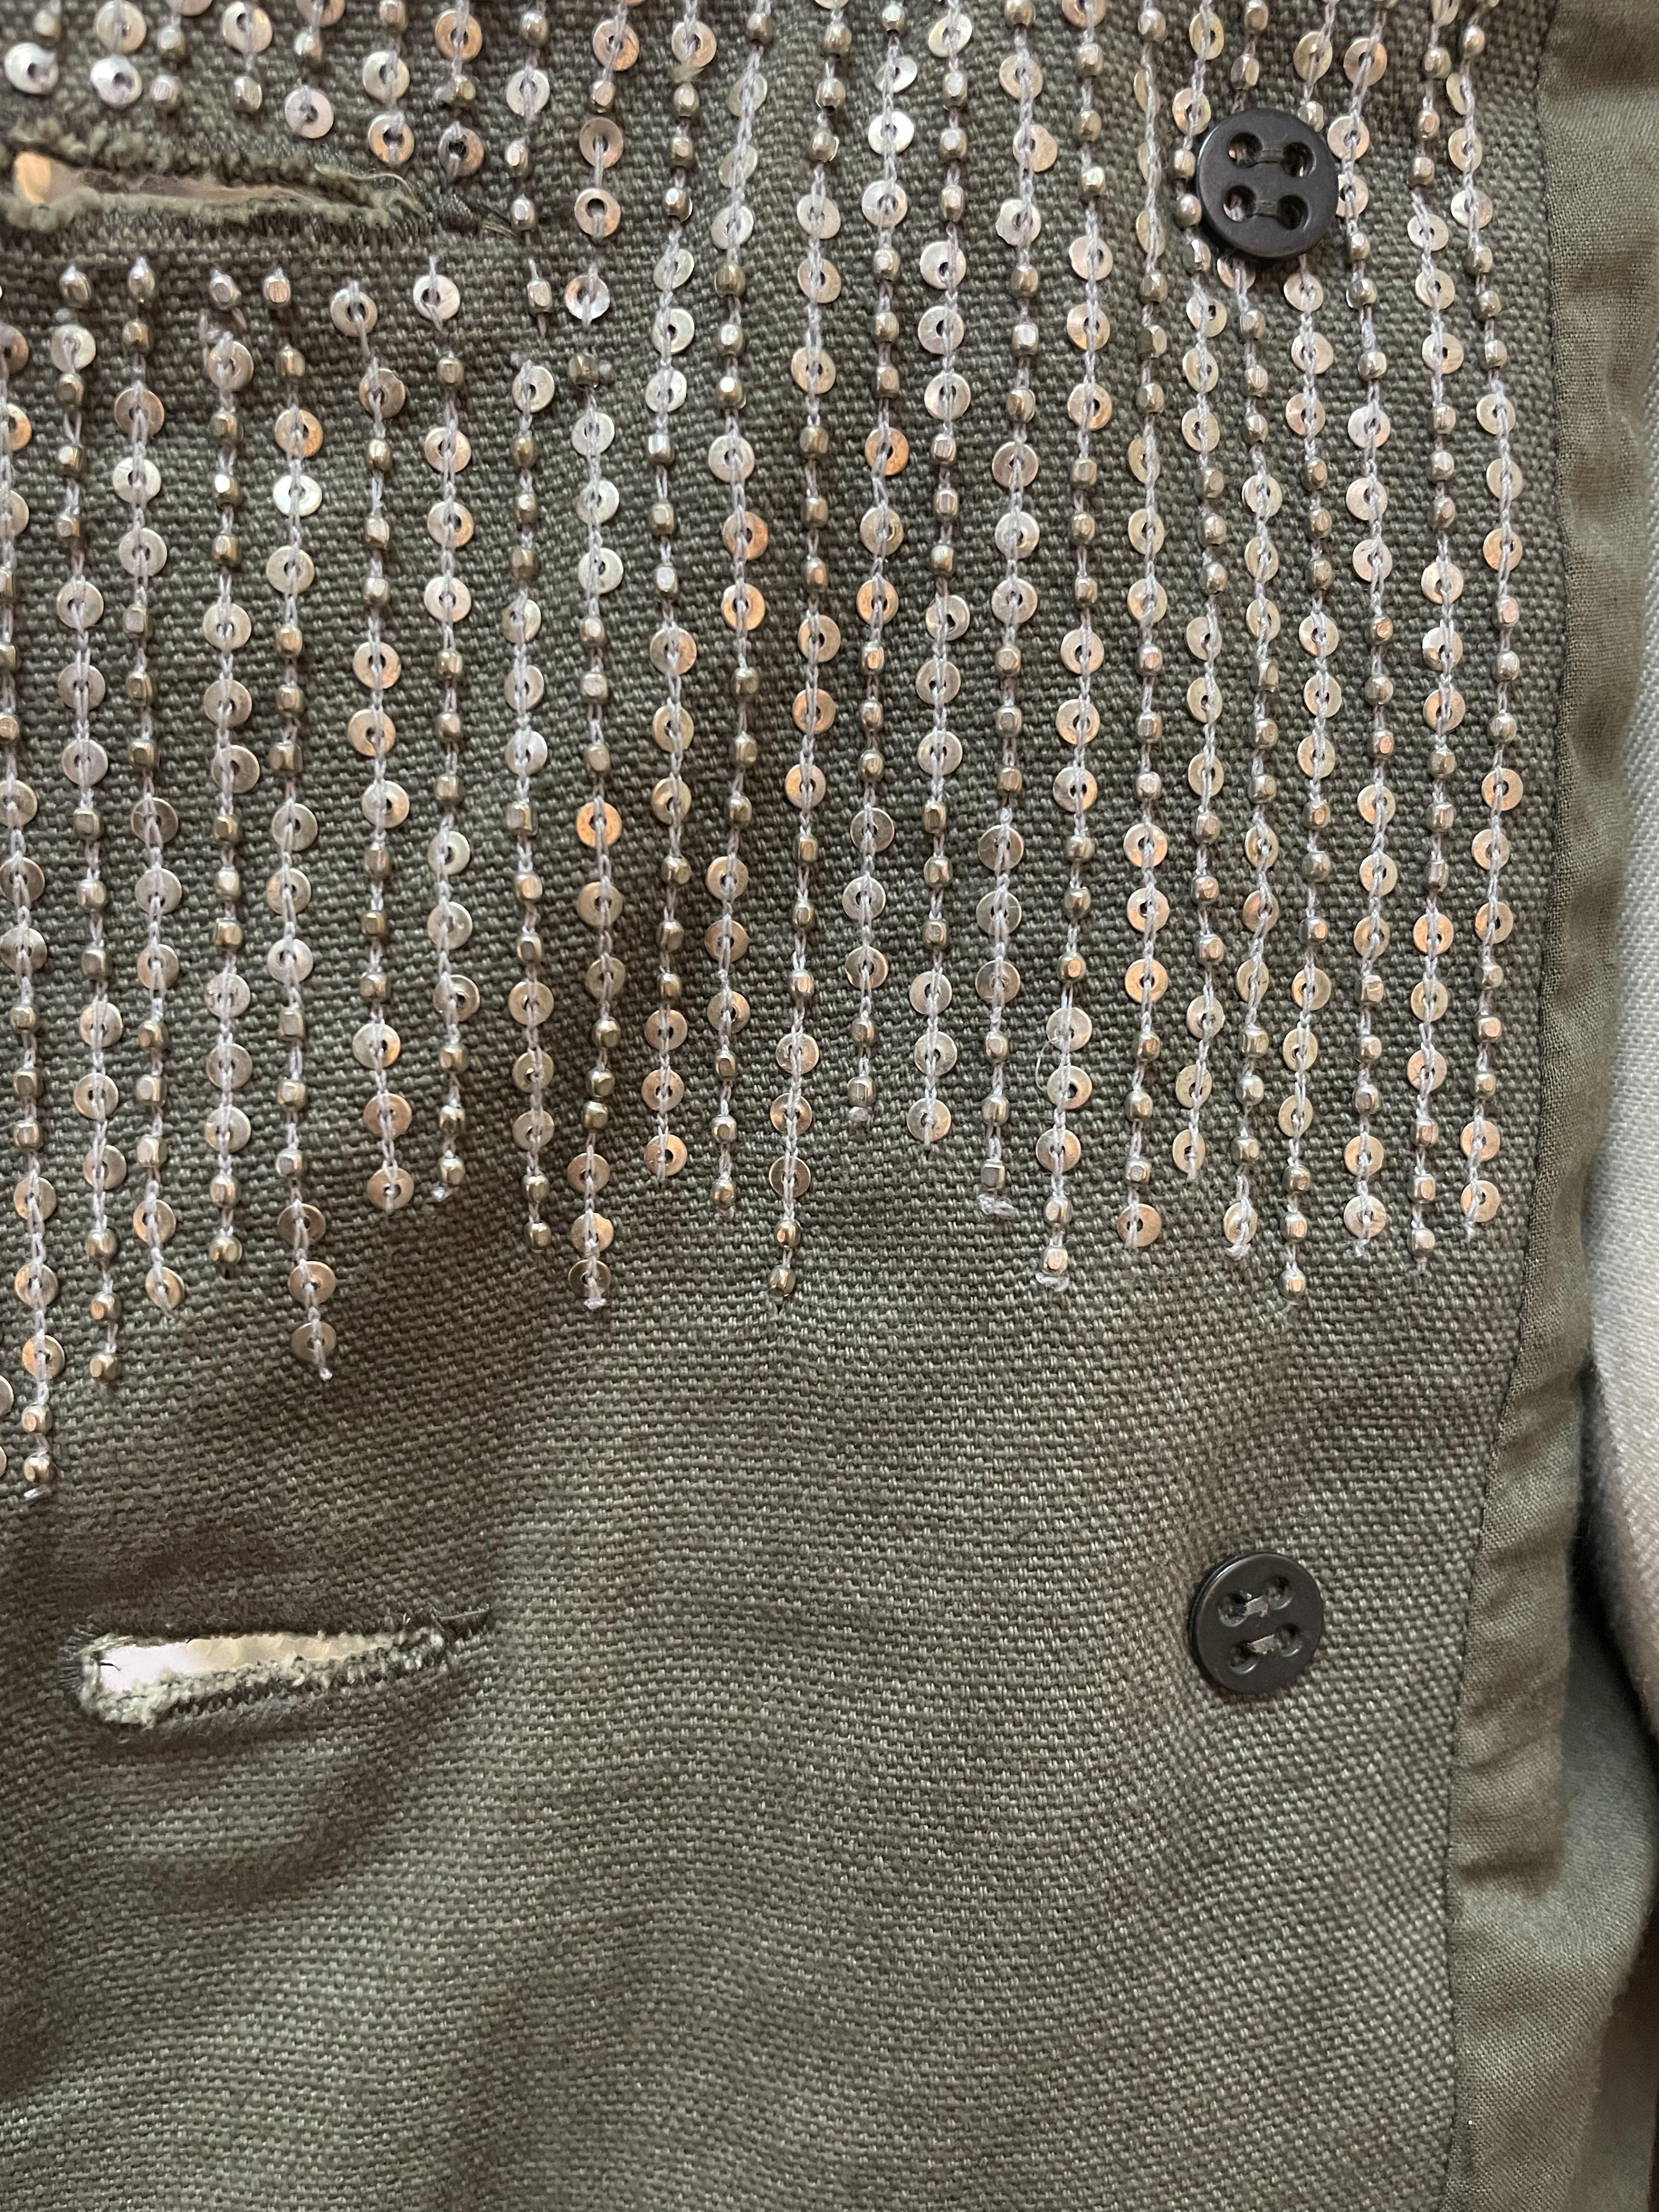 A DRIES VAN NOTEN EMBELLISHED MILITARY JACKET - Image 11 of 13